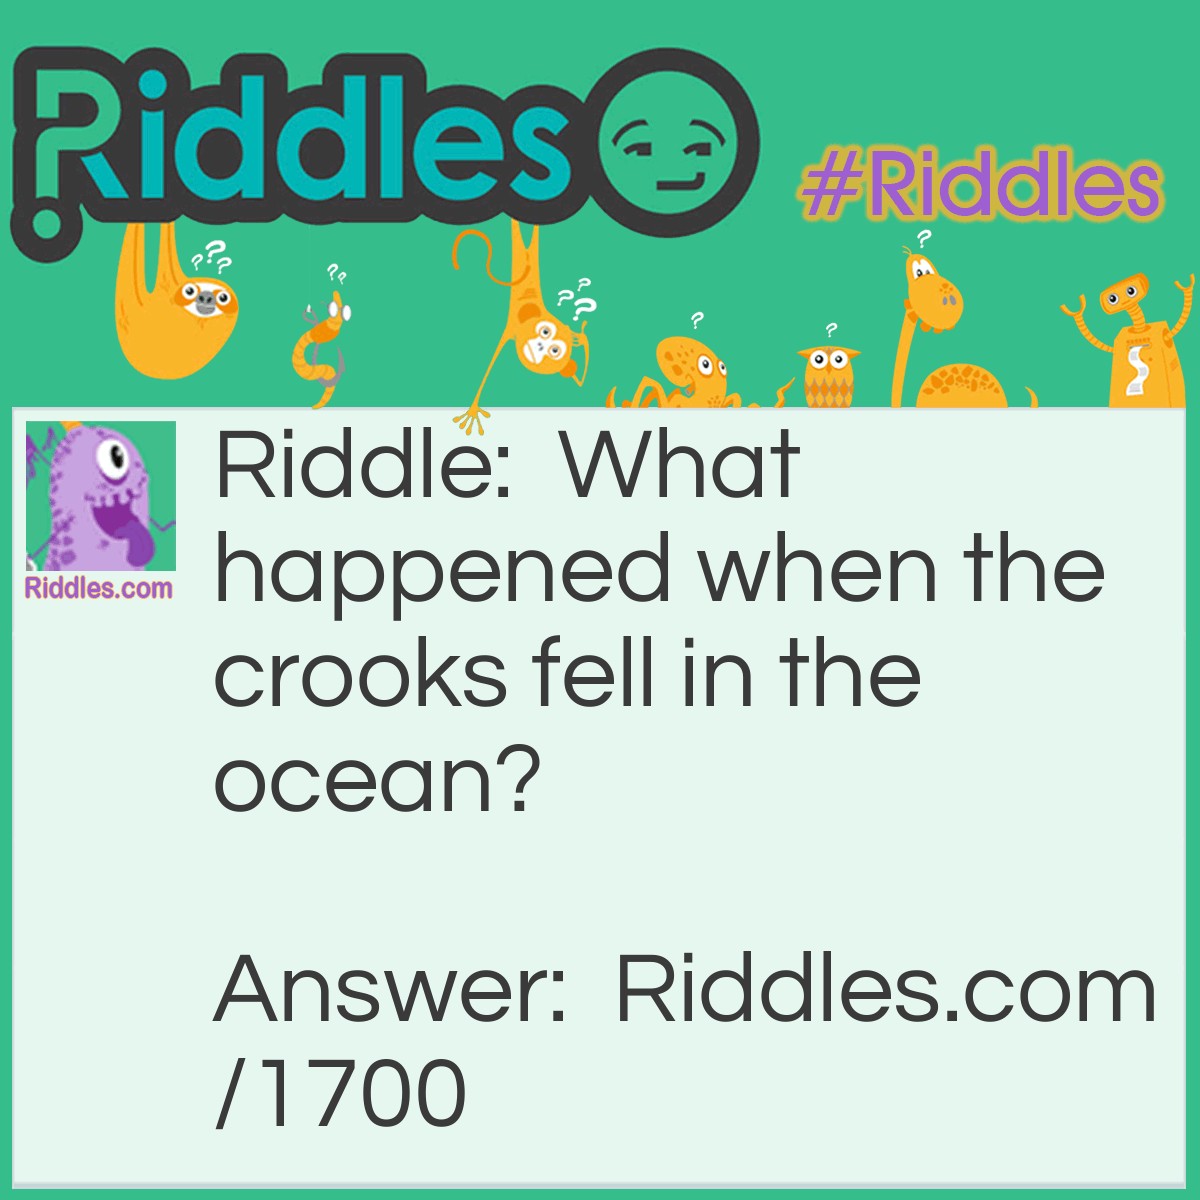 Riddle: What happened when the crooks fell in the ocean? Answer: They started a crime wave.